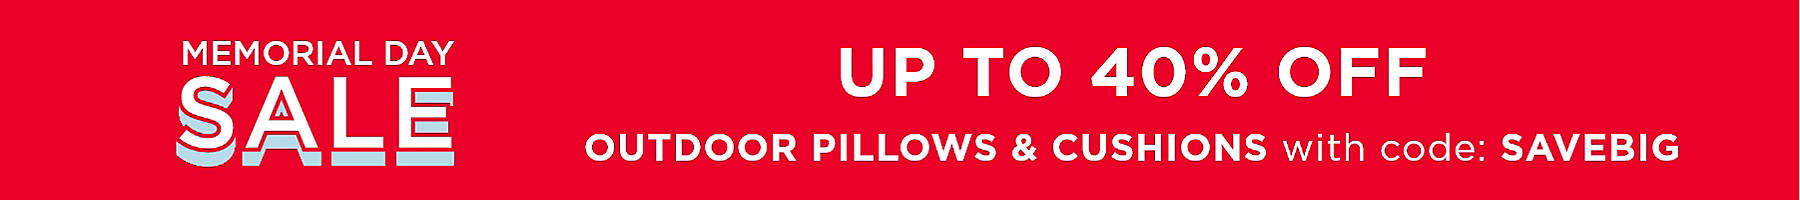 memorial day sale up to 40% off outdoor pillows & cushions with code: BIGSAVE